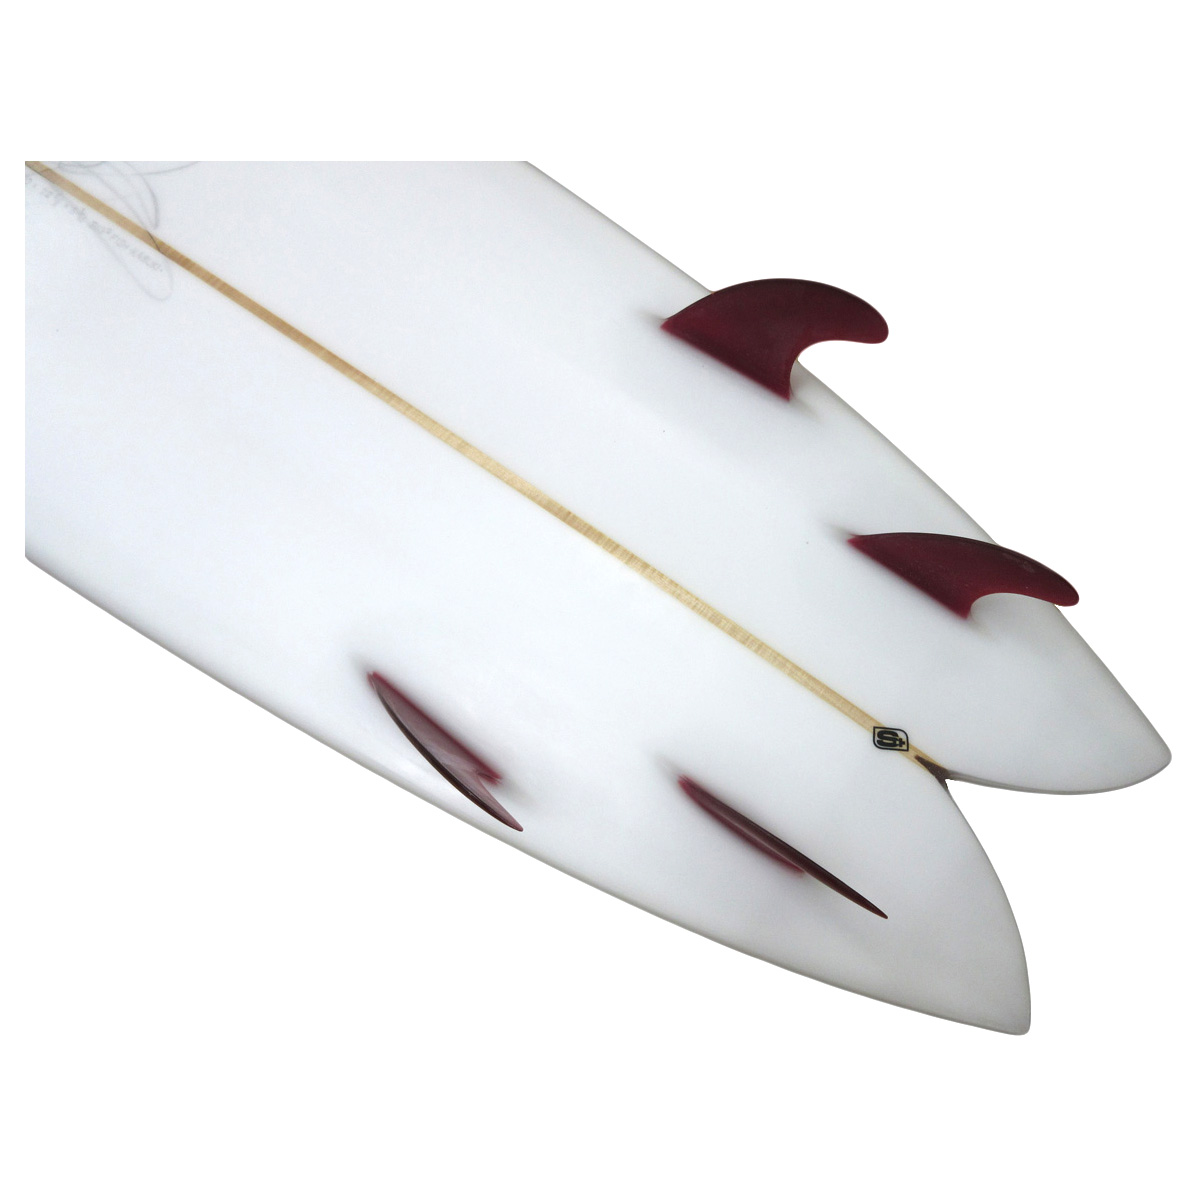 ZOMBIE SURFBOARDS  / Custom BIG FISH 9'0 Shaped by Oba